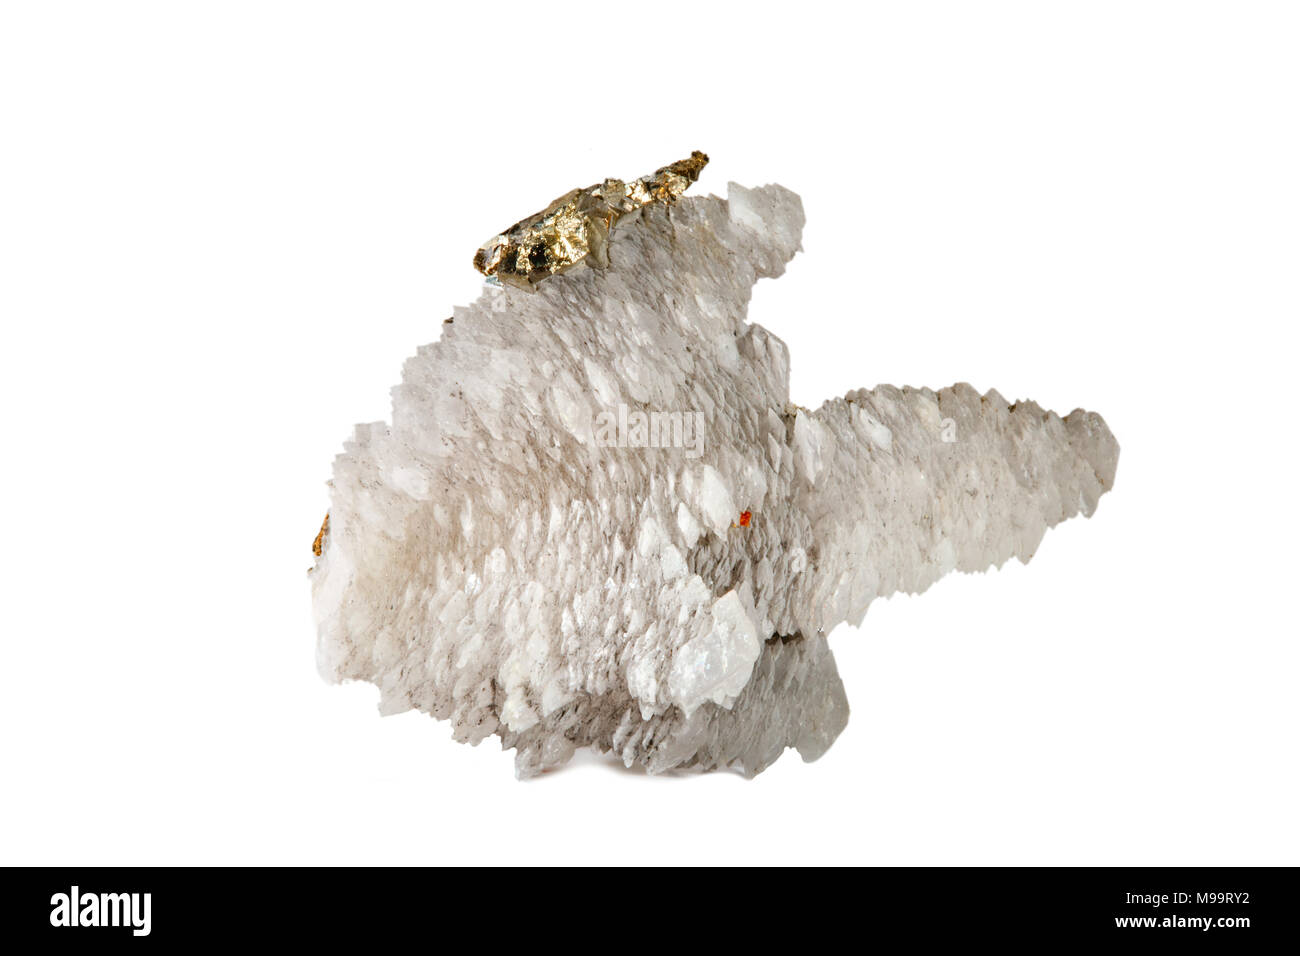 Macro shooting of natural gemstone. Raw calcite mineral with pyrite. Isolated object on a white background. Stock Photo